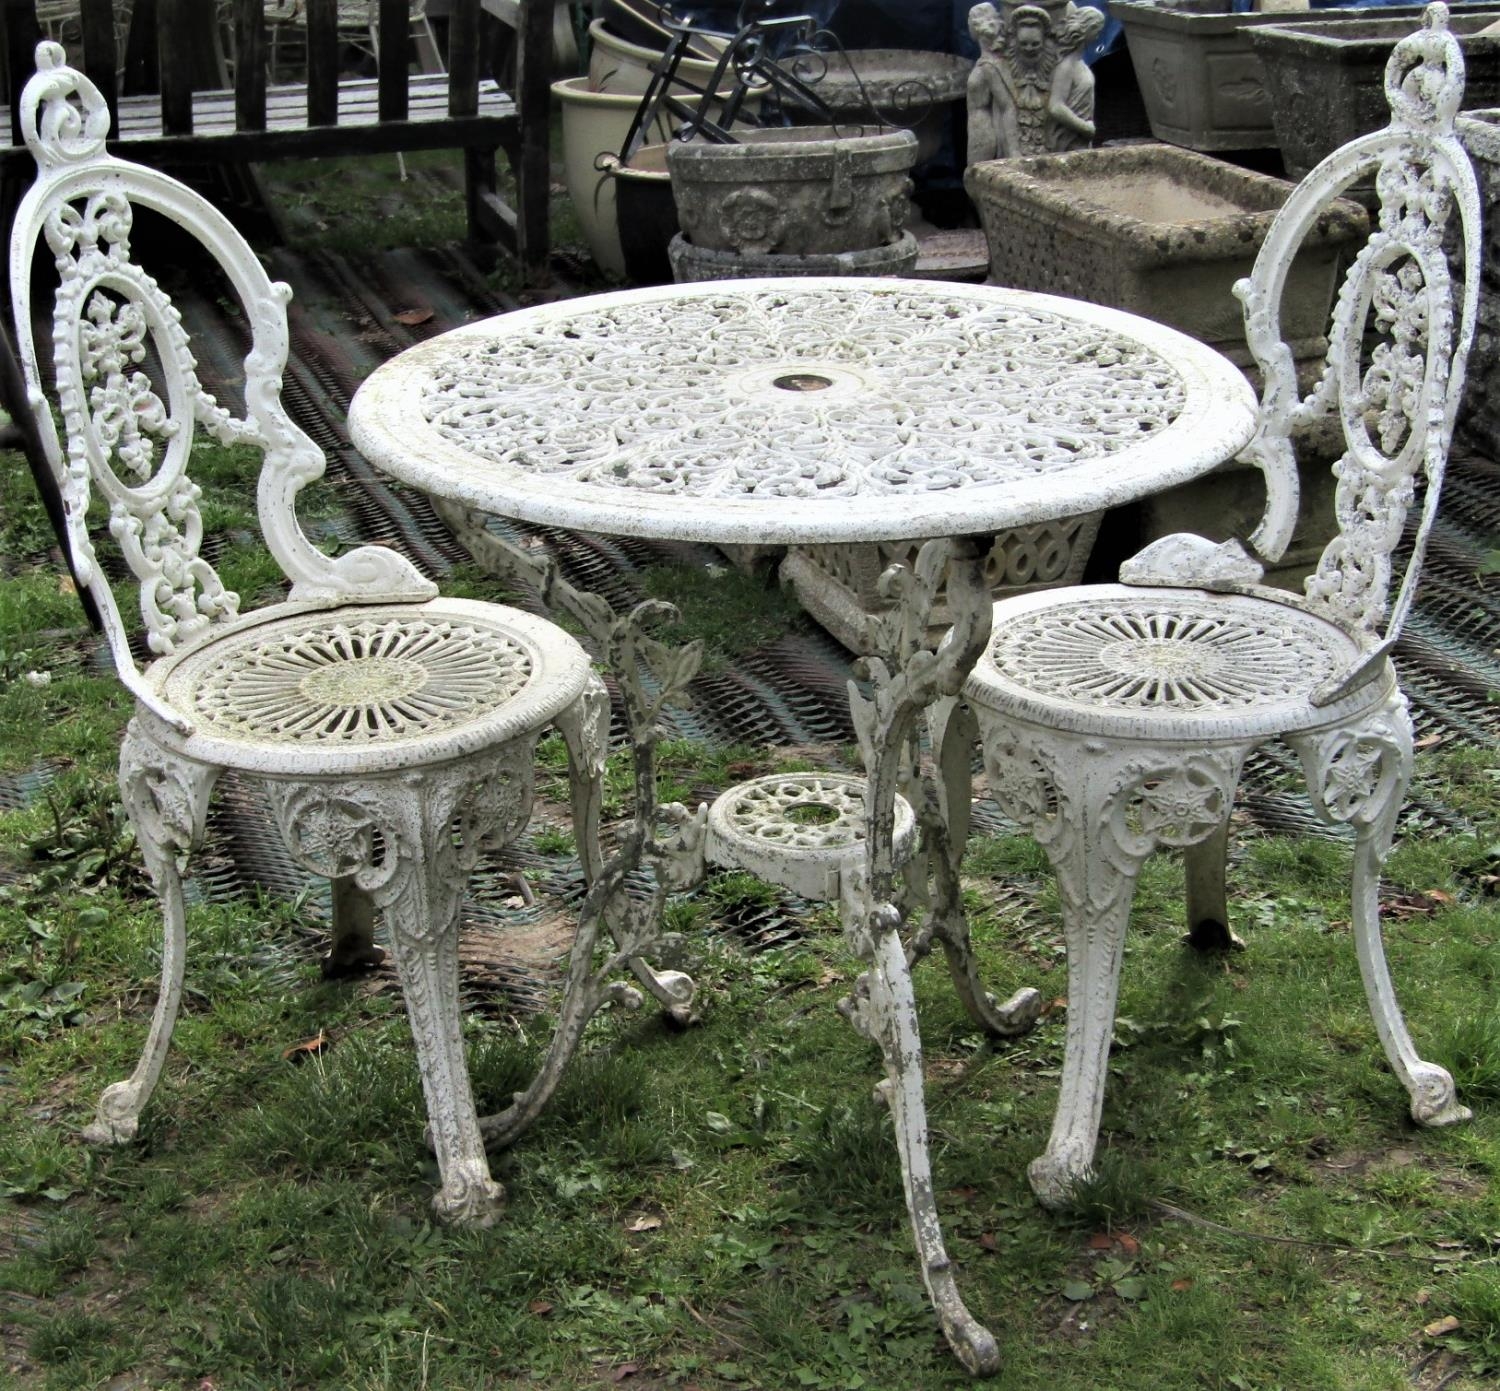 A weathered, painted cast aluminium garden terrace table, with circular pierced top raised on